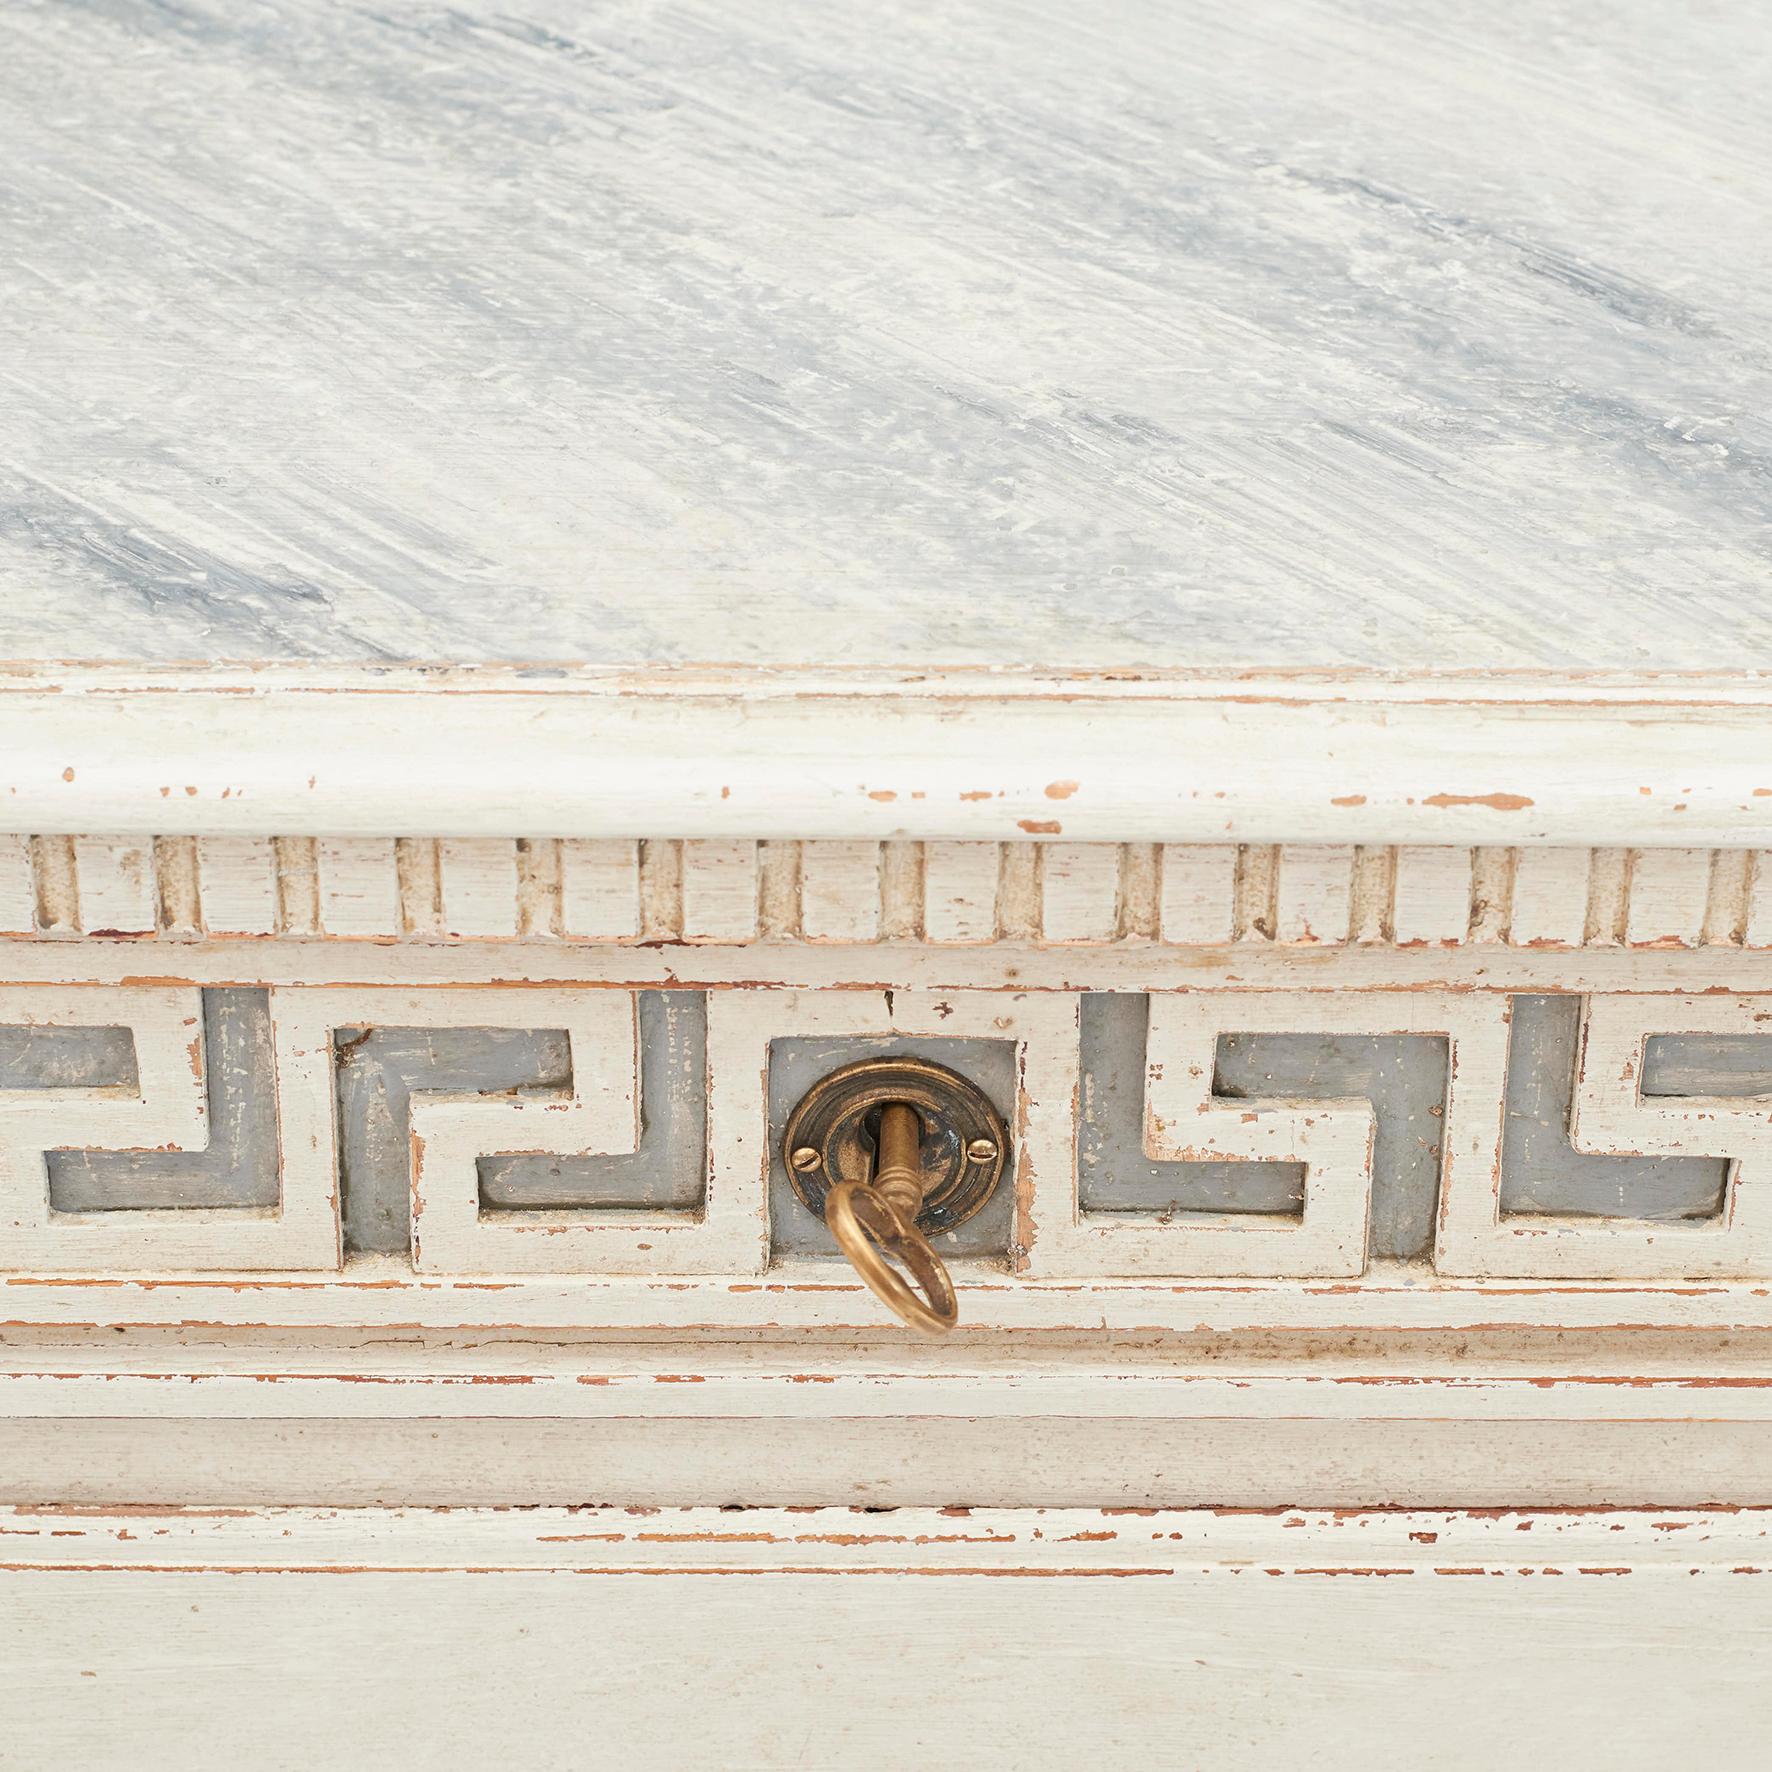 Swedish Gustavian / Louis XVI chest of drawers. Grey-white painted, top grey marble painted. 3 lockable drawers with brass fittings. One key. Top drawer with Grecian key pattern, fluted columns on each side. Sweden approximate, 1730-1740.